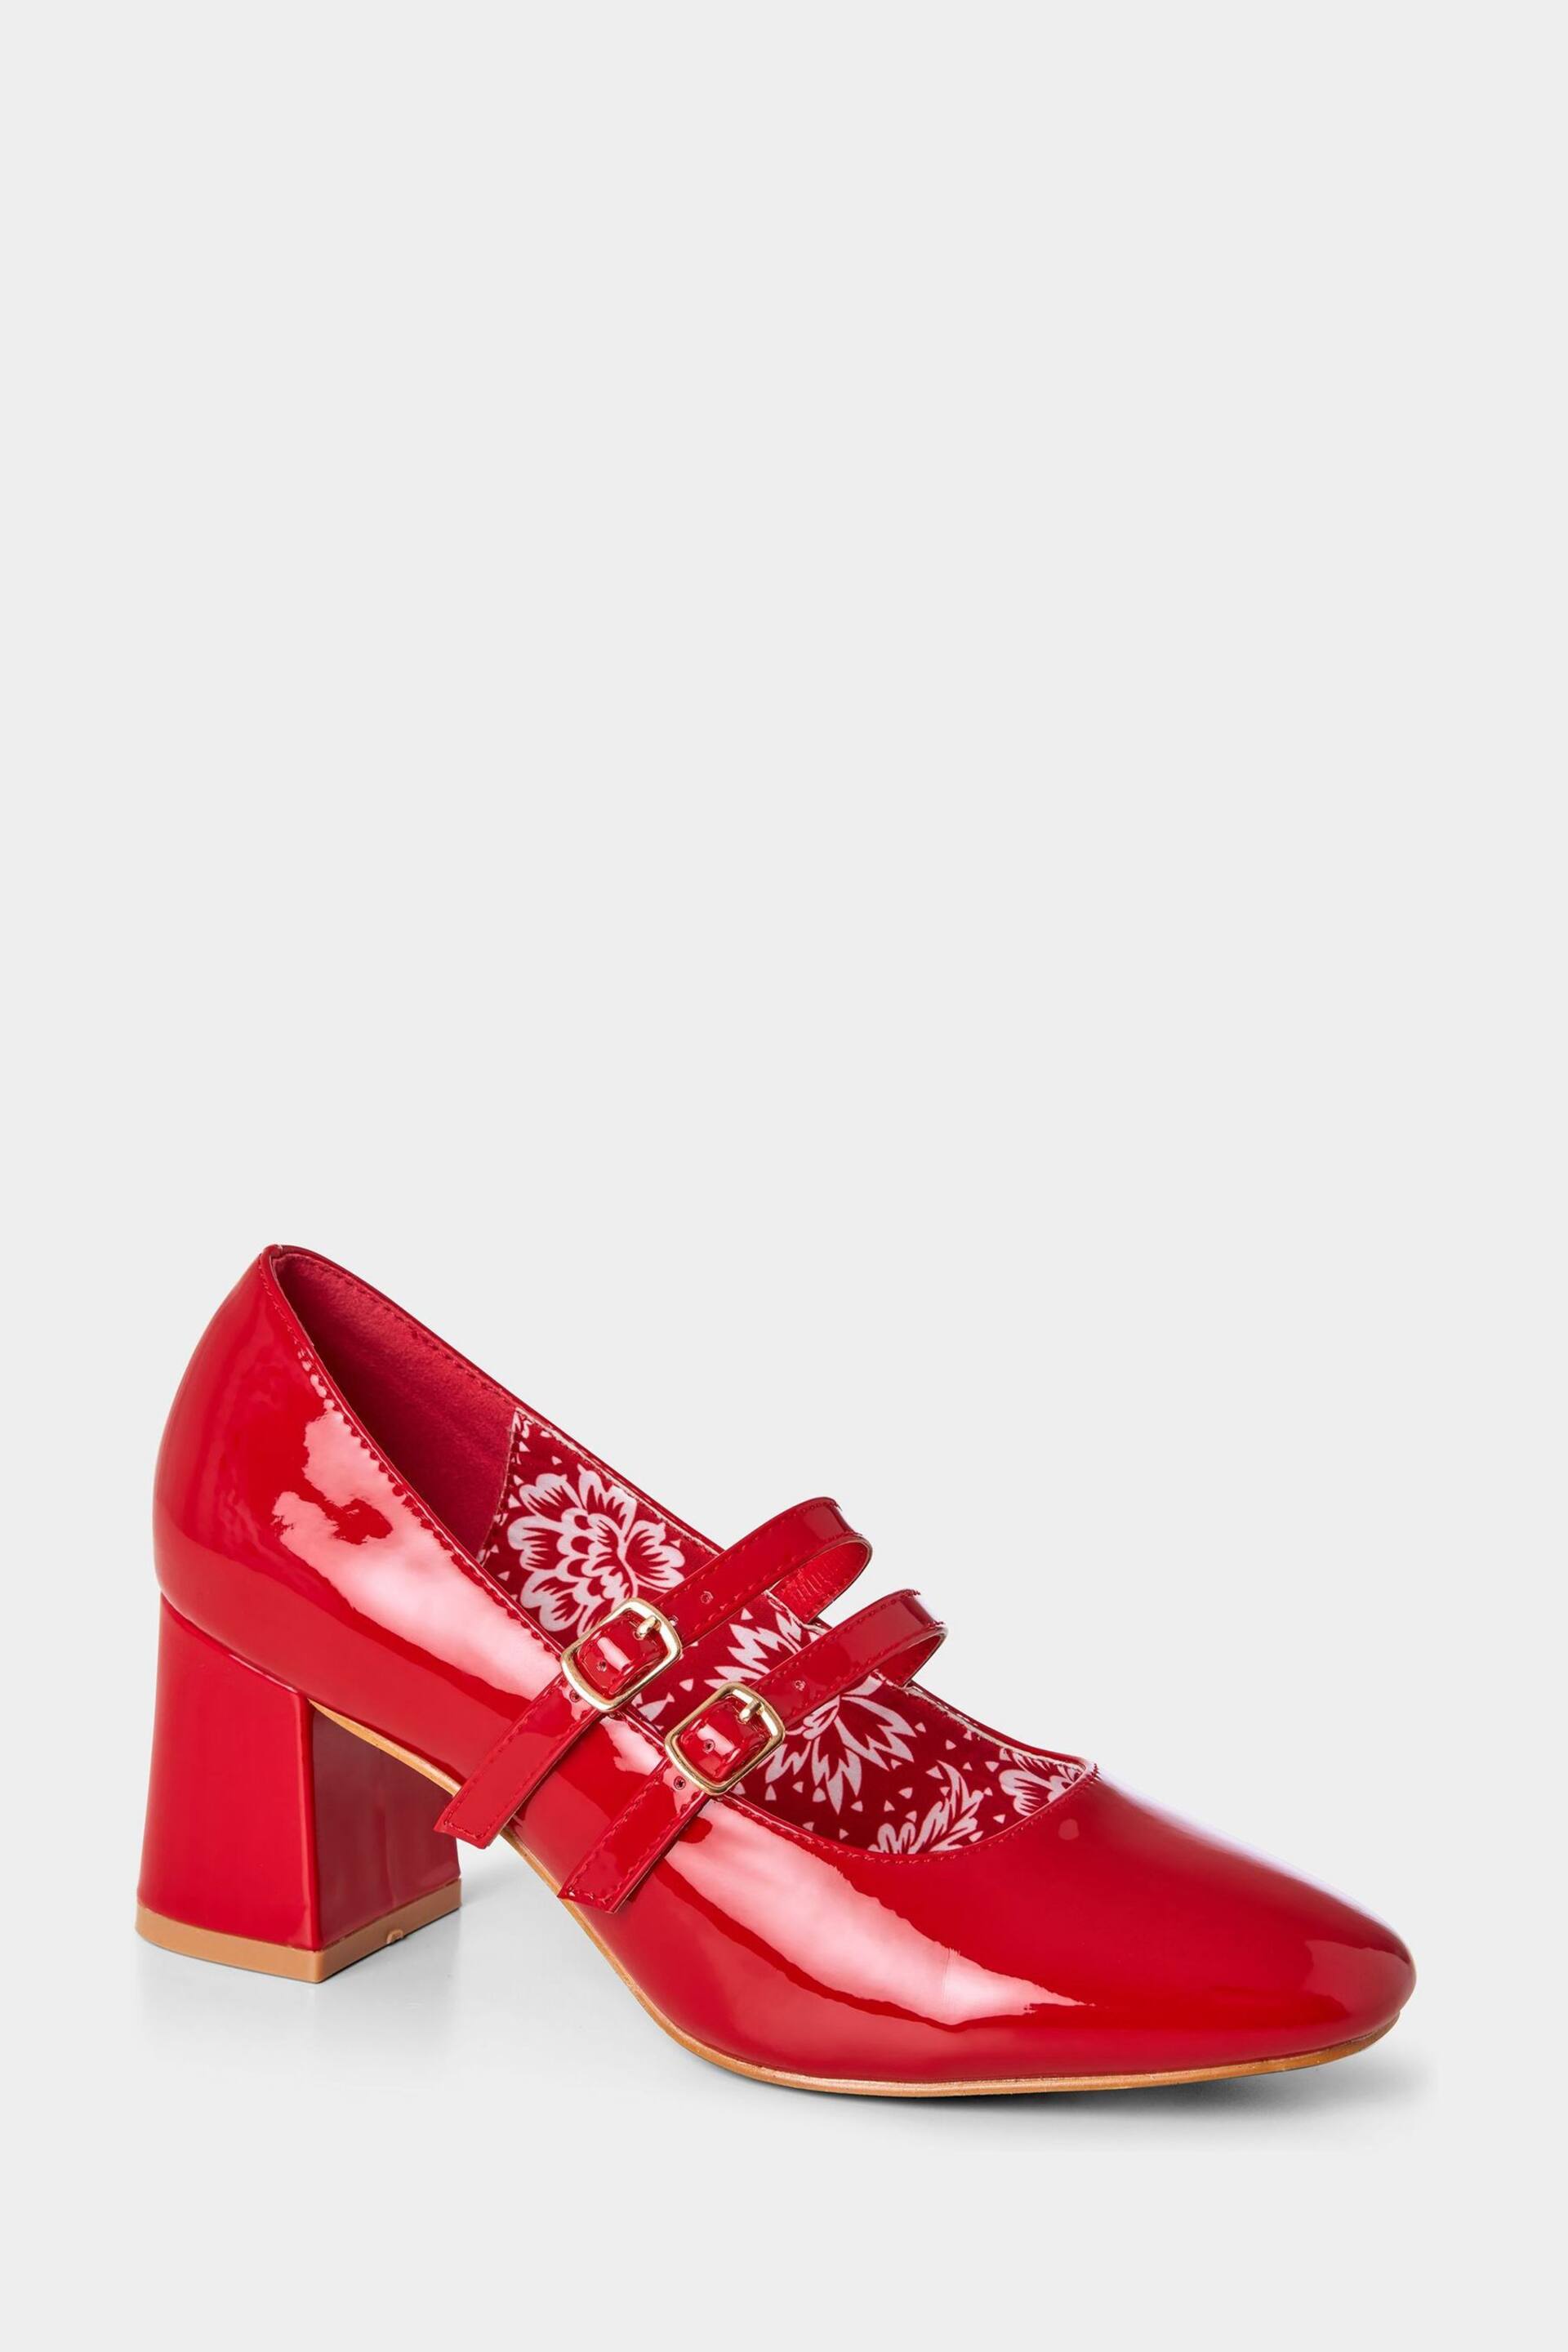 Joe Browns Red Twin Strap Mary Jane Heels - Image 3 of 4